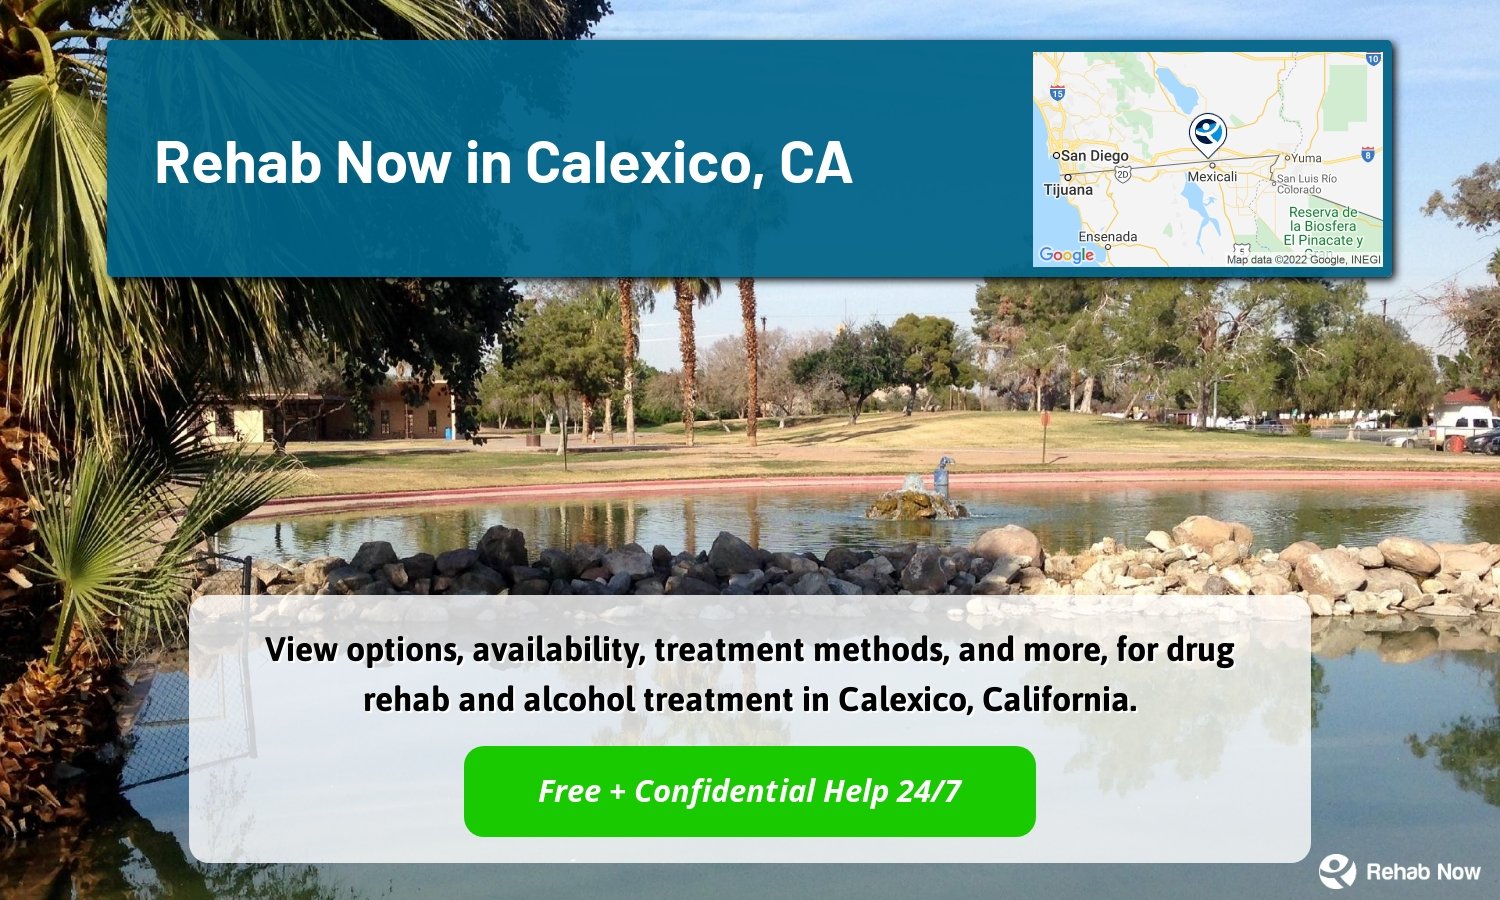 View options, availability, treatment methods, and more, for drug rehab and alcohol treatment in Calexico, California.